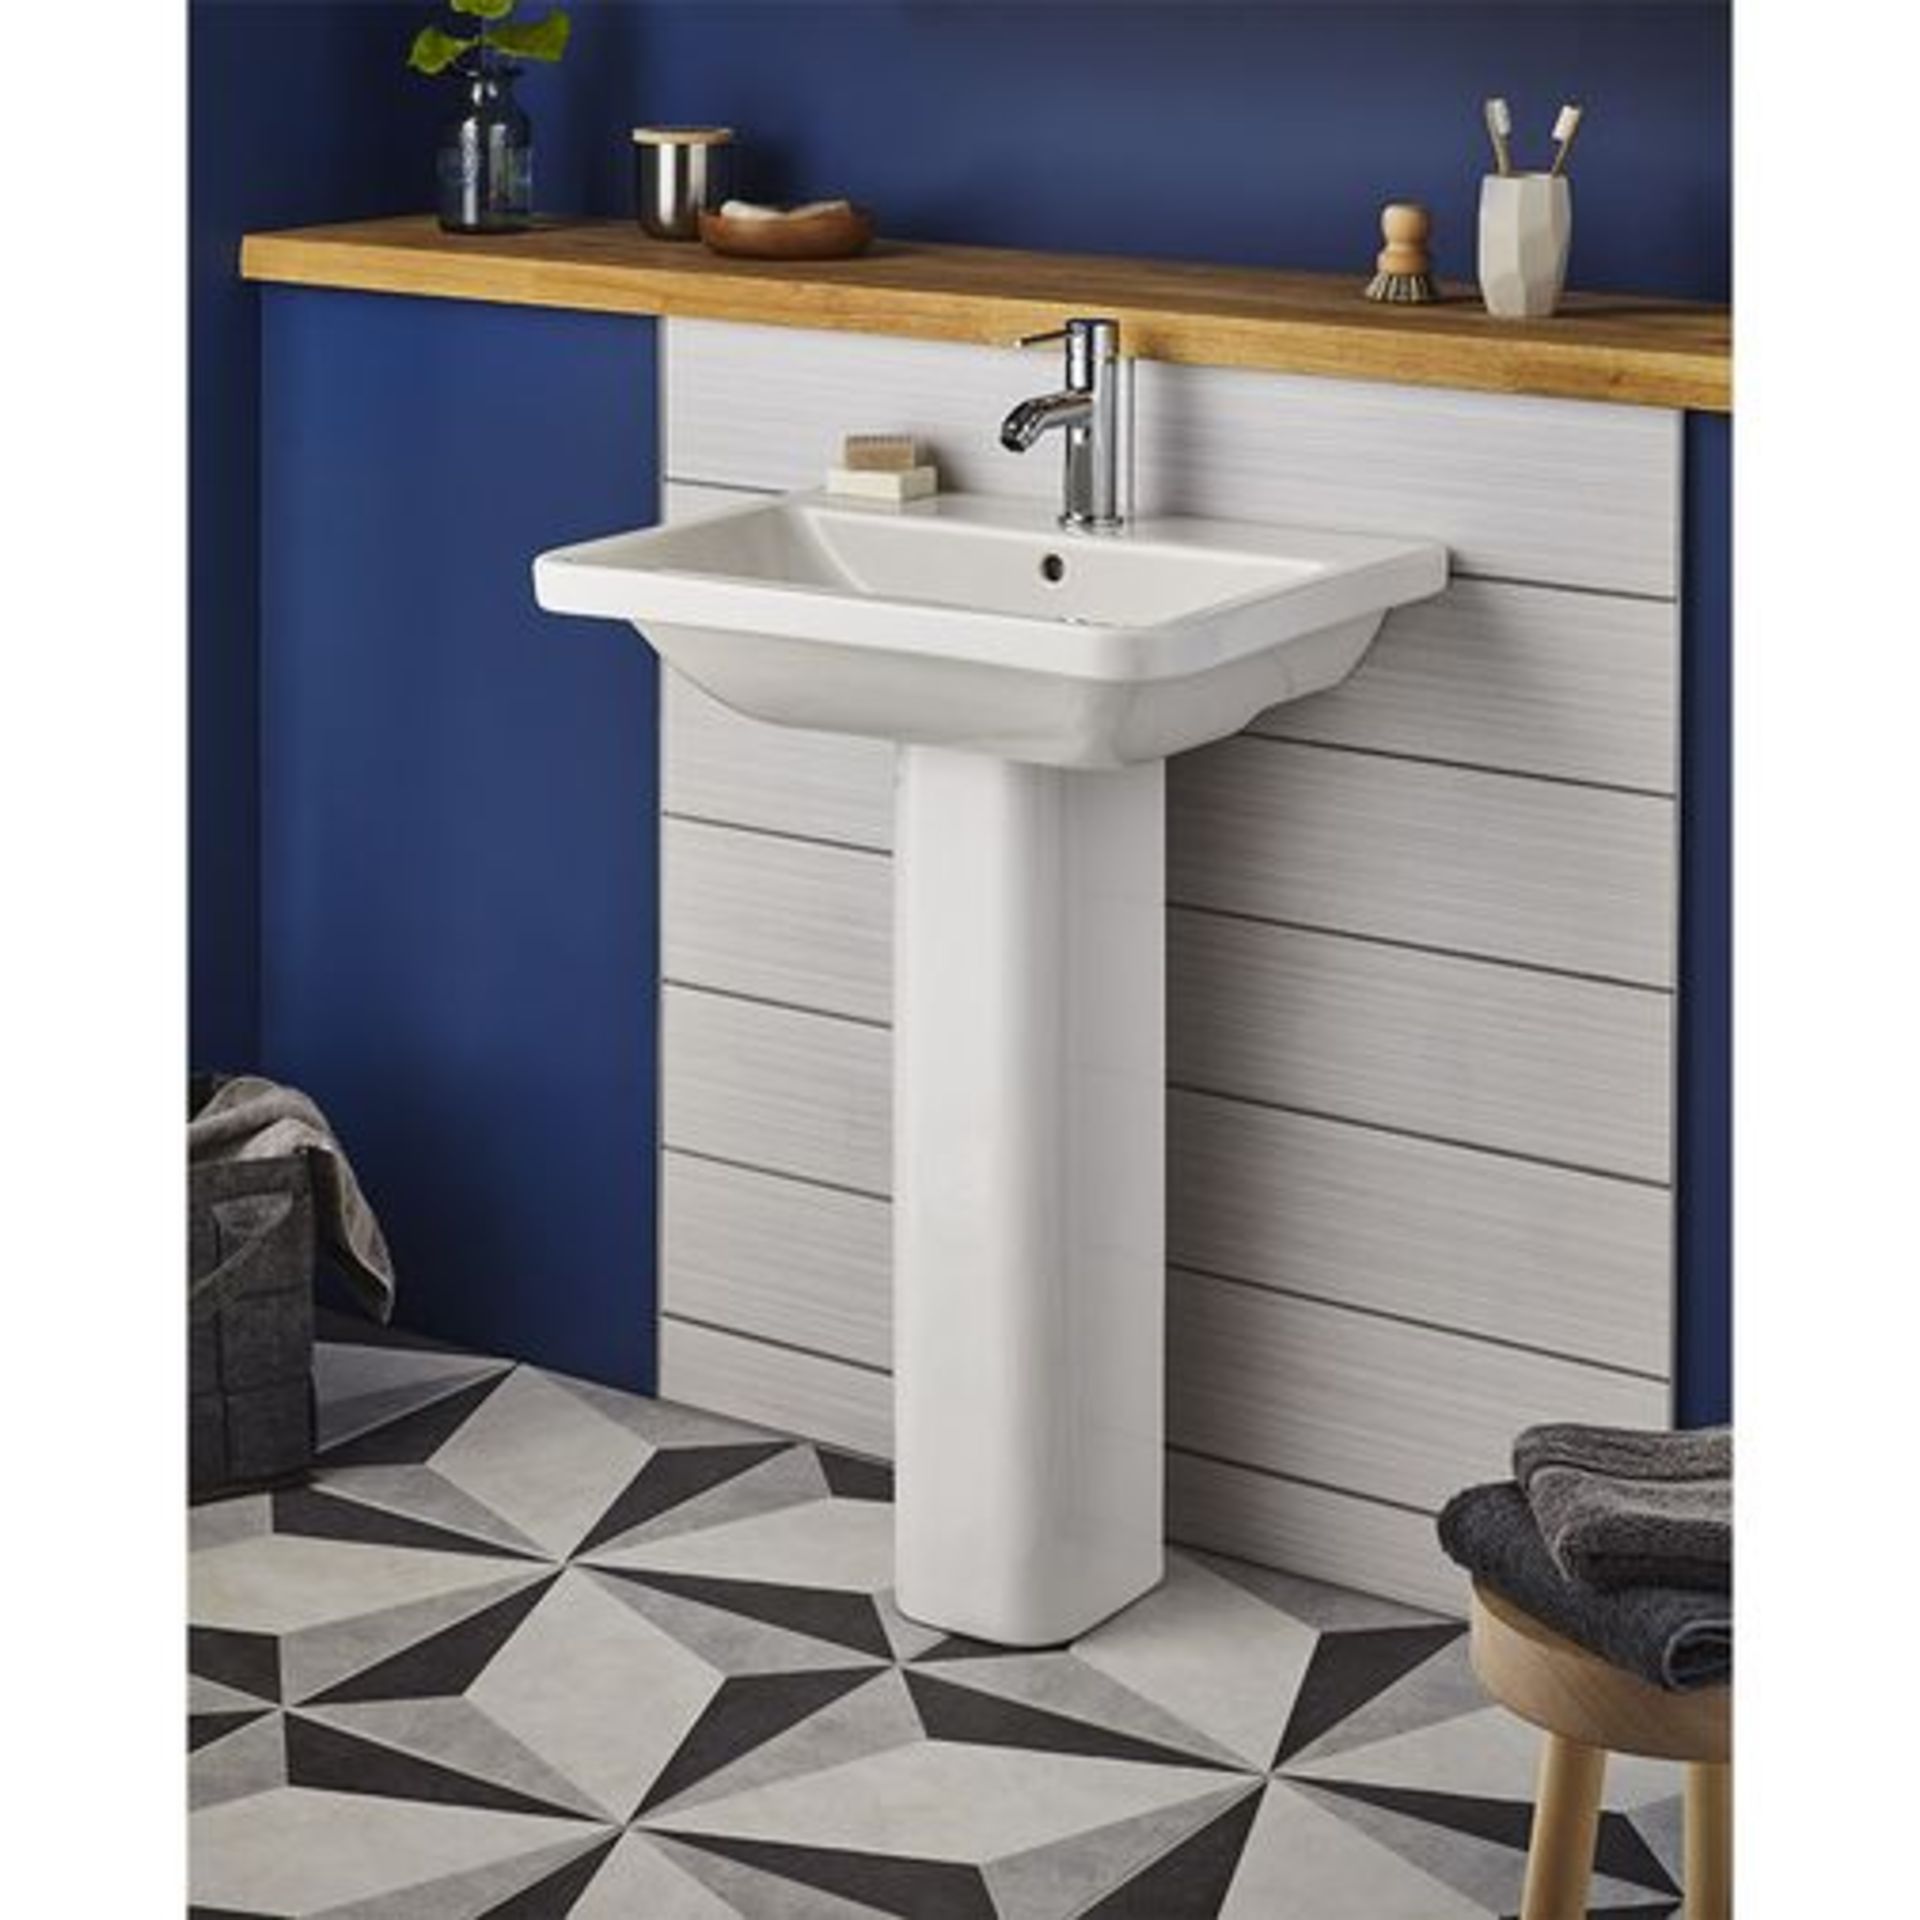 EURO 500mm DESIGNER BASIN WITH PEDESTAL. CAN BE WALL OR PEDESTAL MOUNTED. RRP £395.